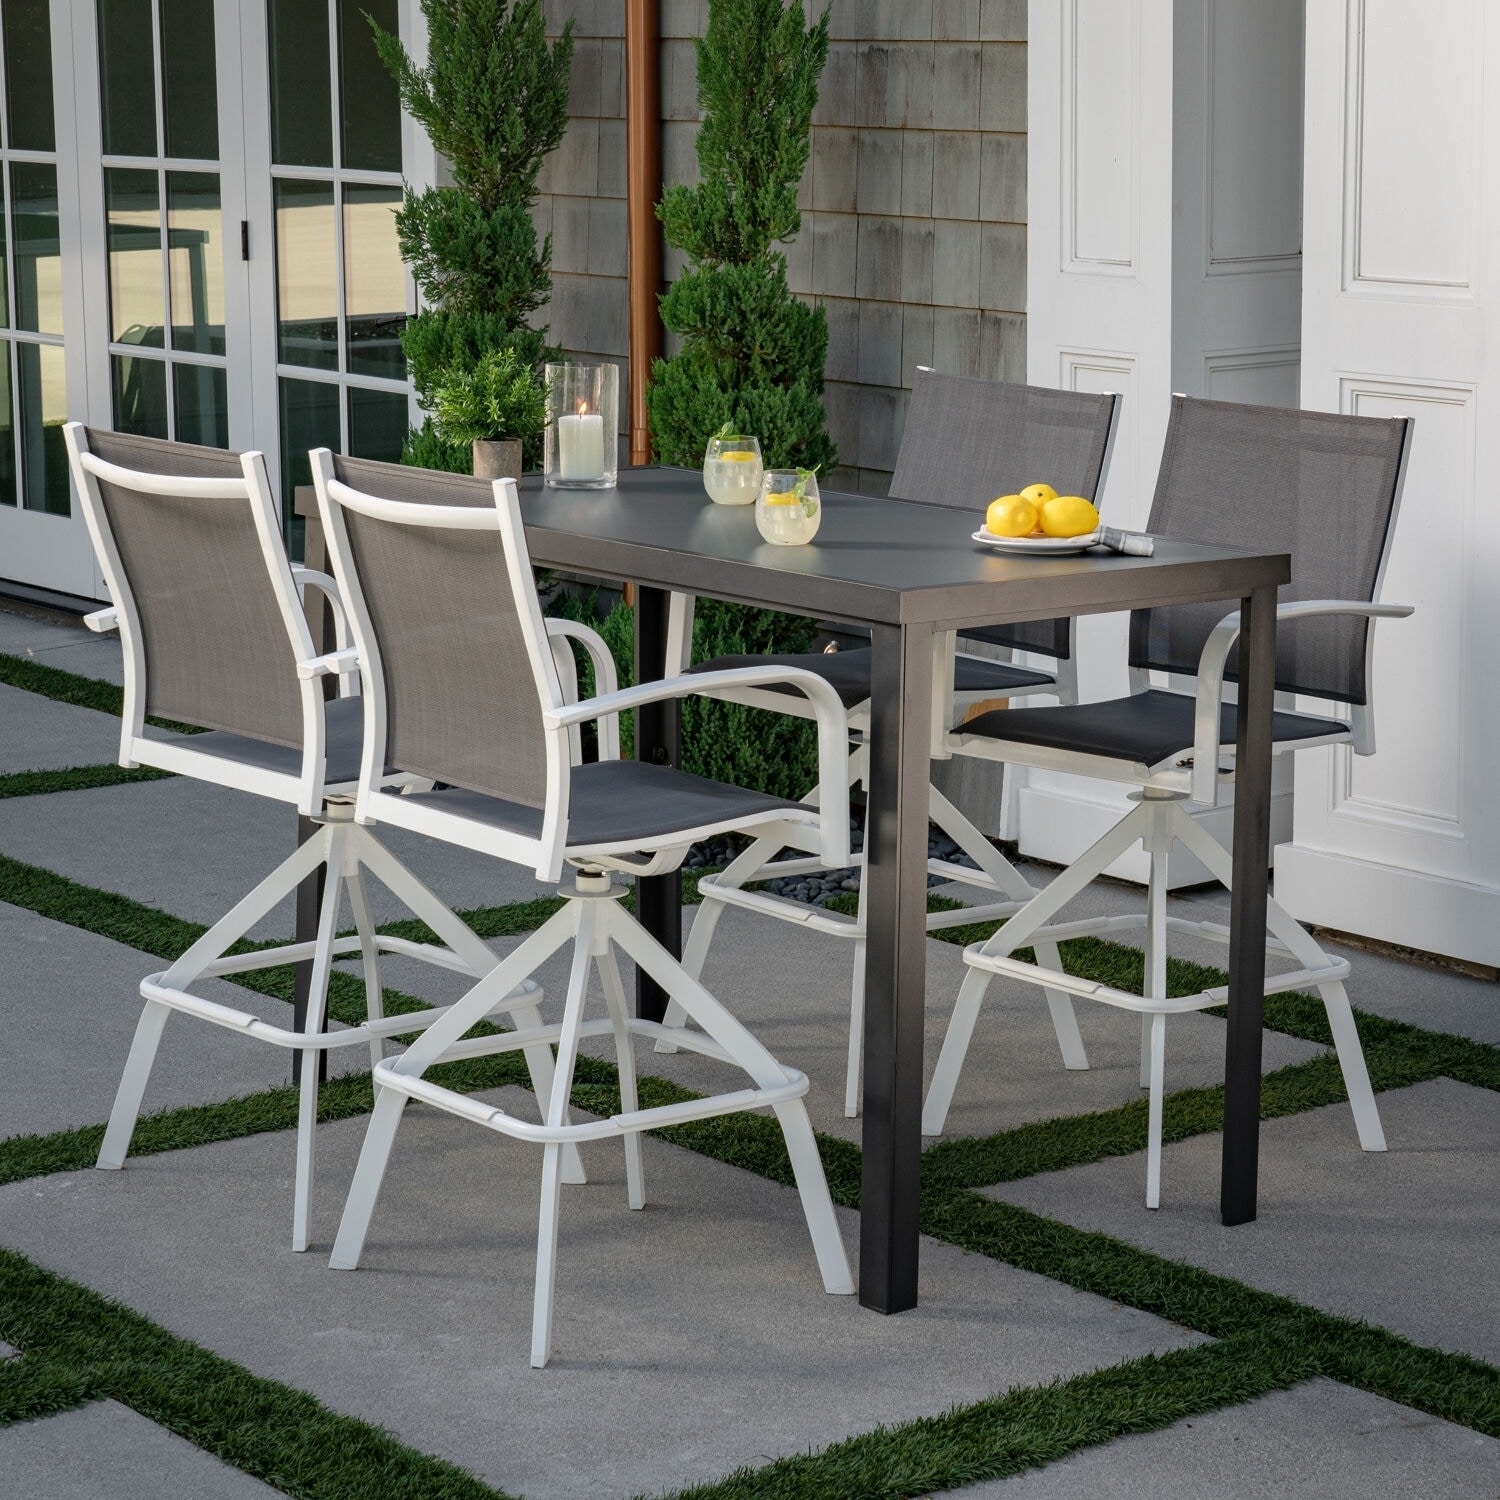 Hanover Naples 5-piece Outdoor High-dining Set With 4 Swivel Bar Chairs And A Glass-top Bar Table  White/gray